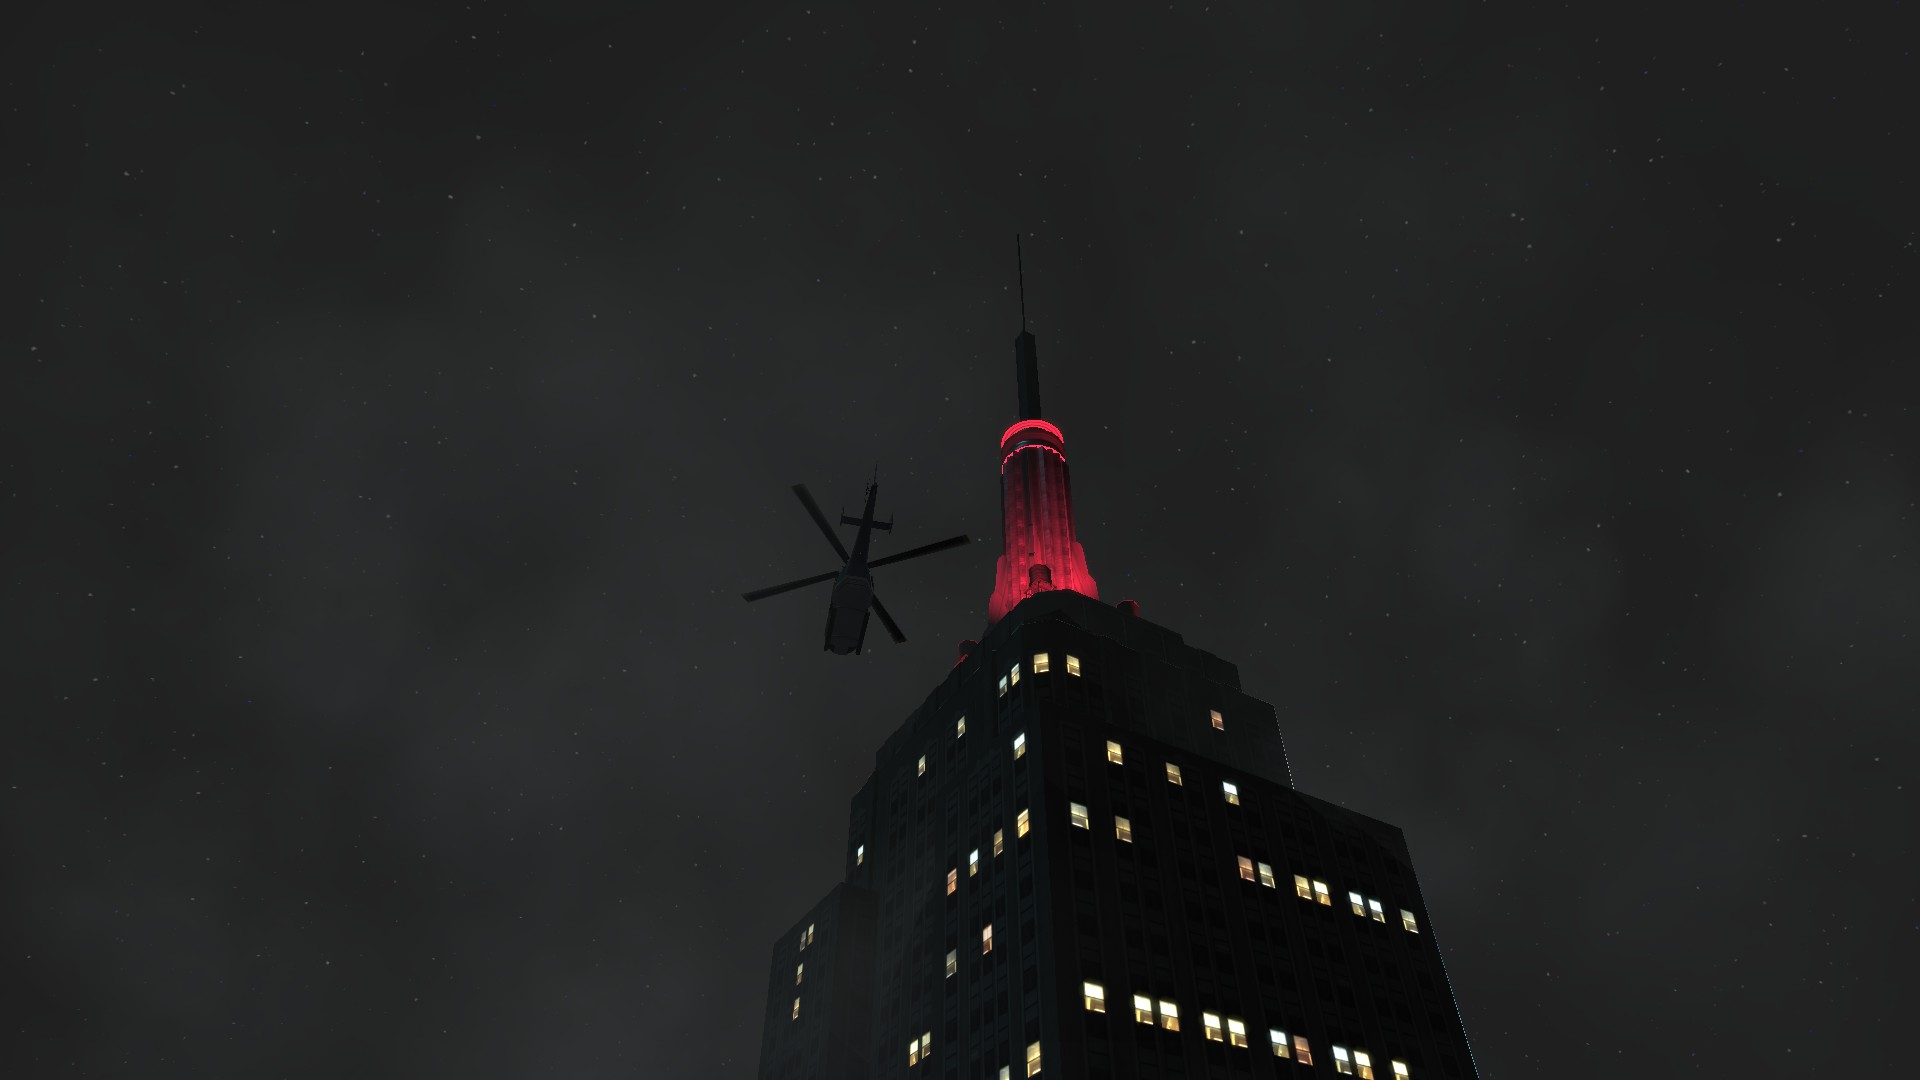 General 1920x1080 Grand Theft Auto IV night video games helicopters video game art screen shot sky stars CGI building aircraft Grand Theft Auto clouds